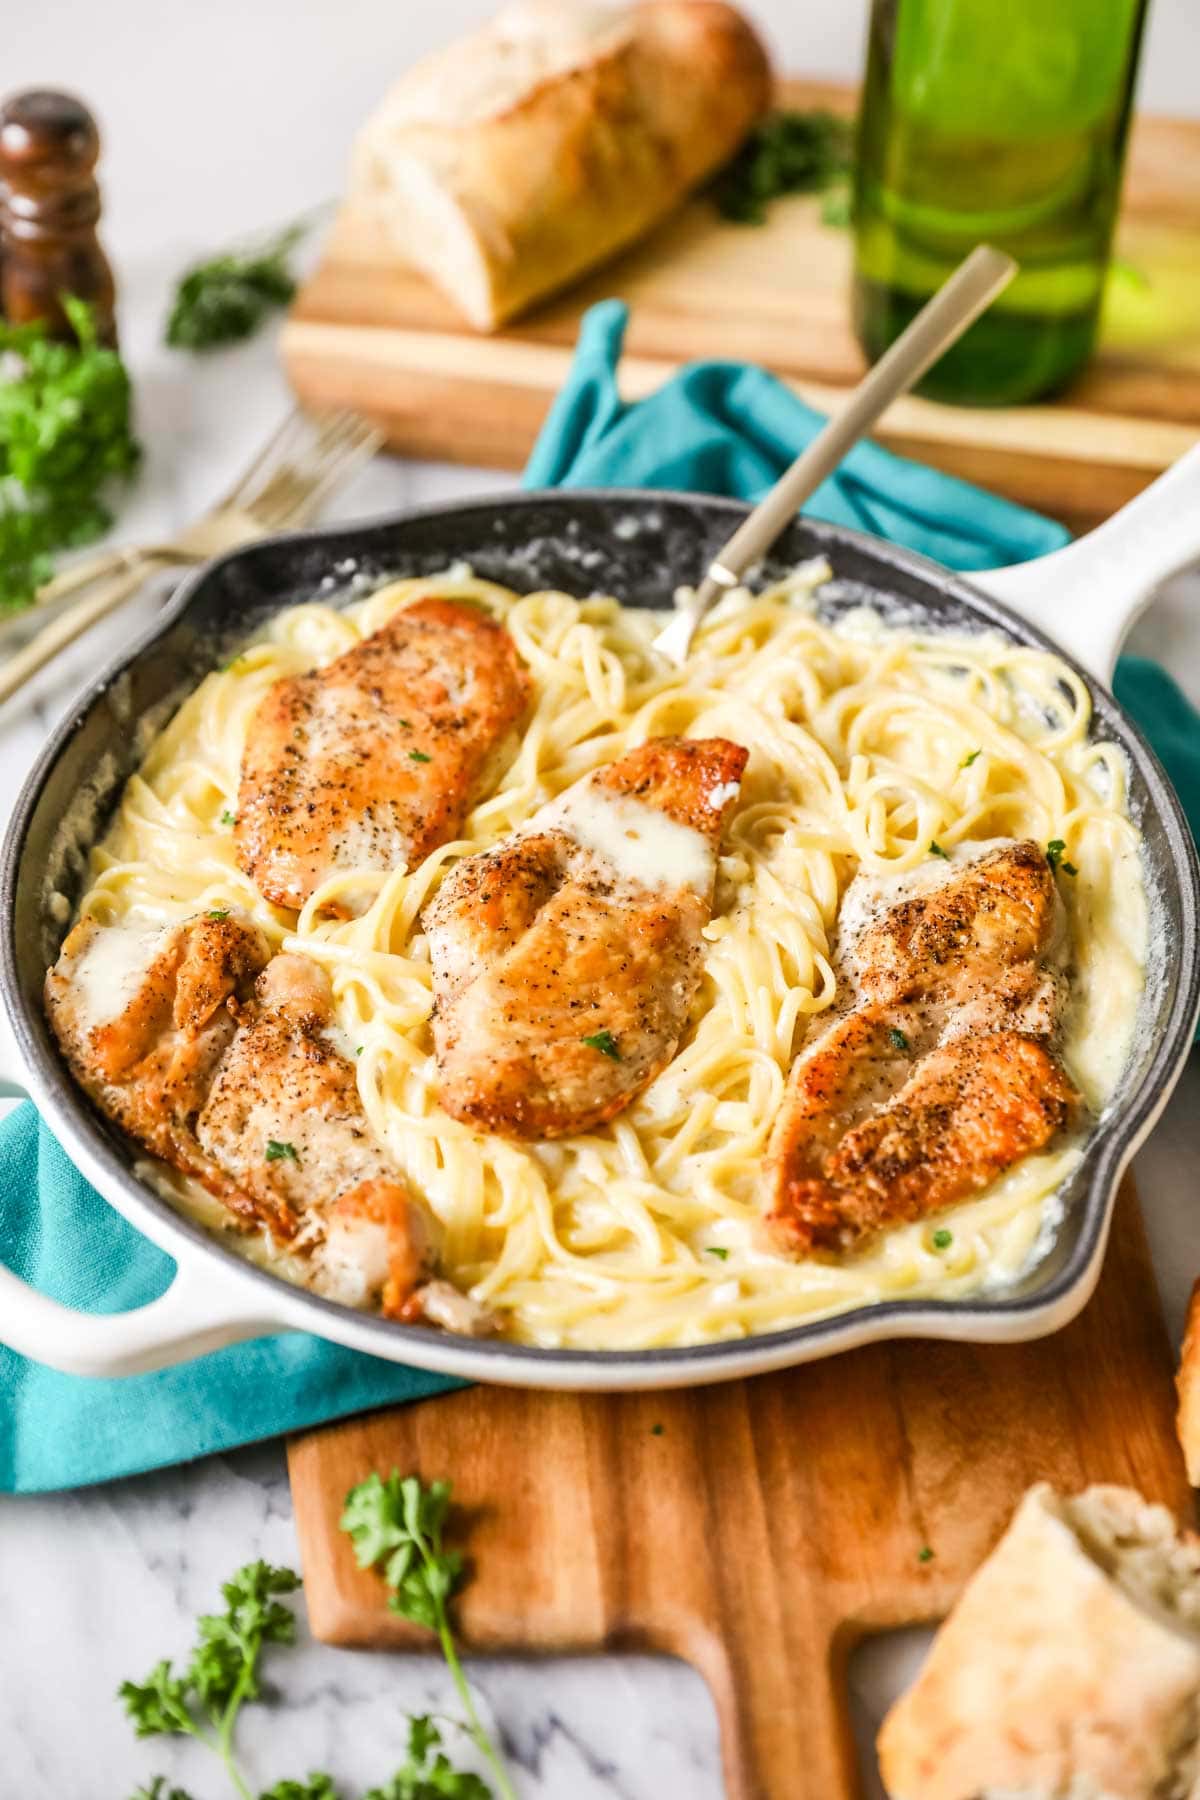 Skillet of pasta with alfredo sauce and seared chicken breasts.